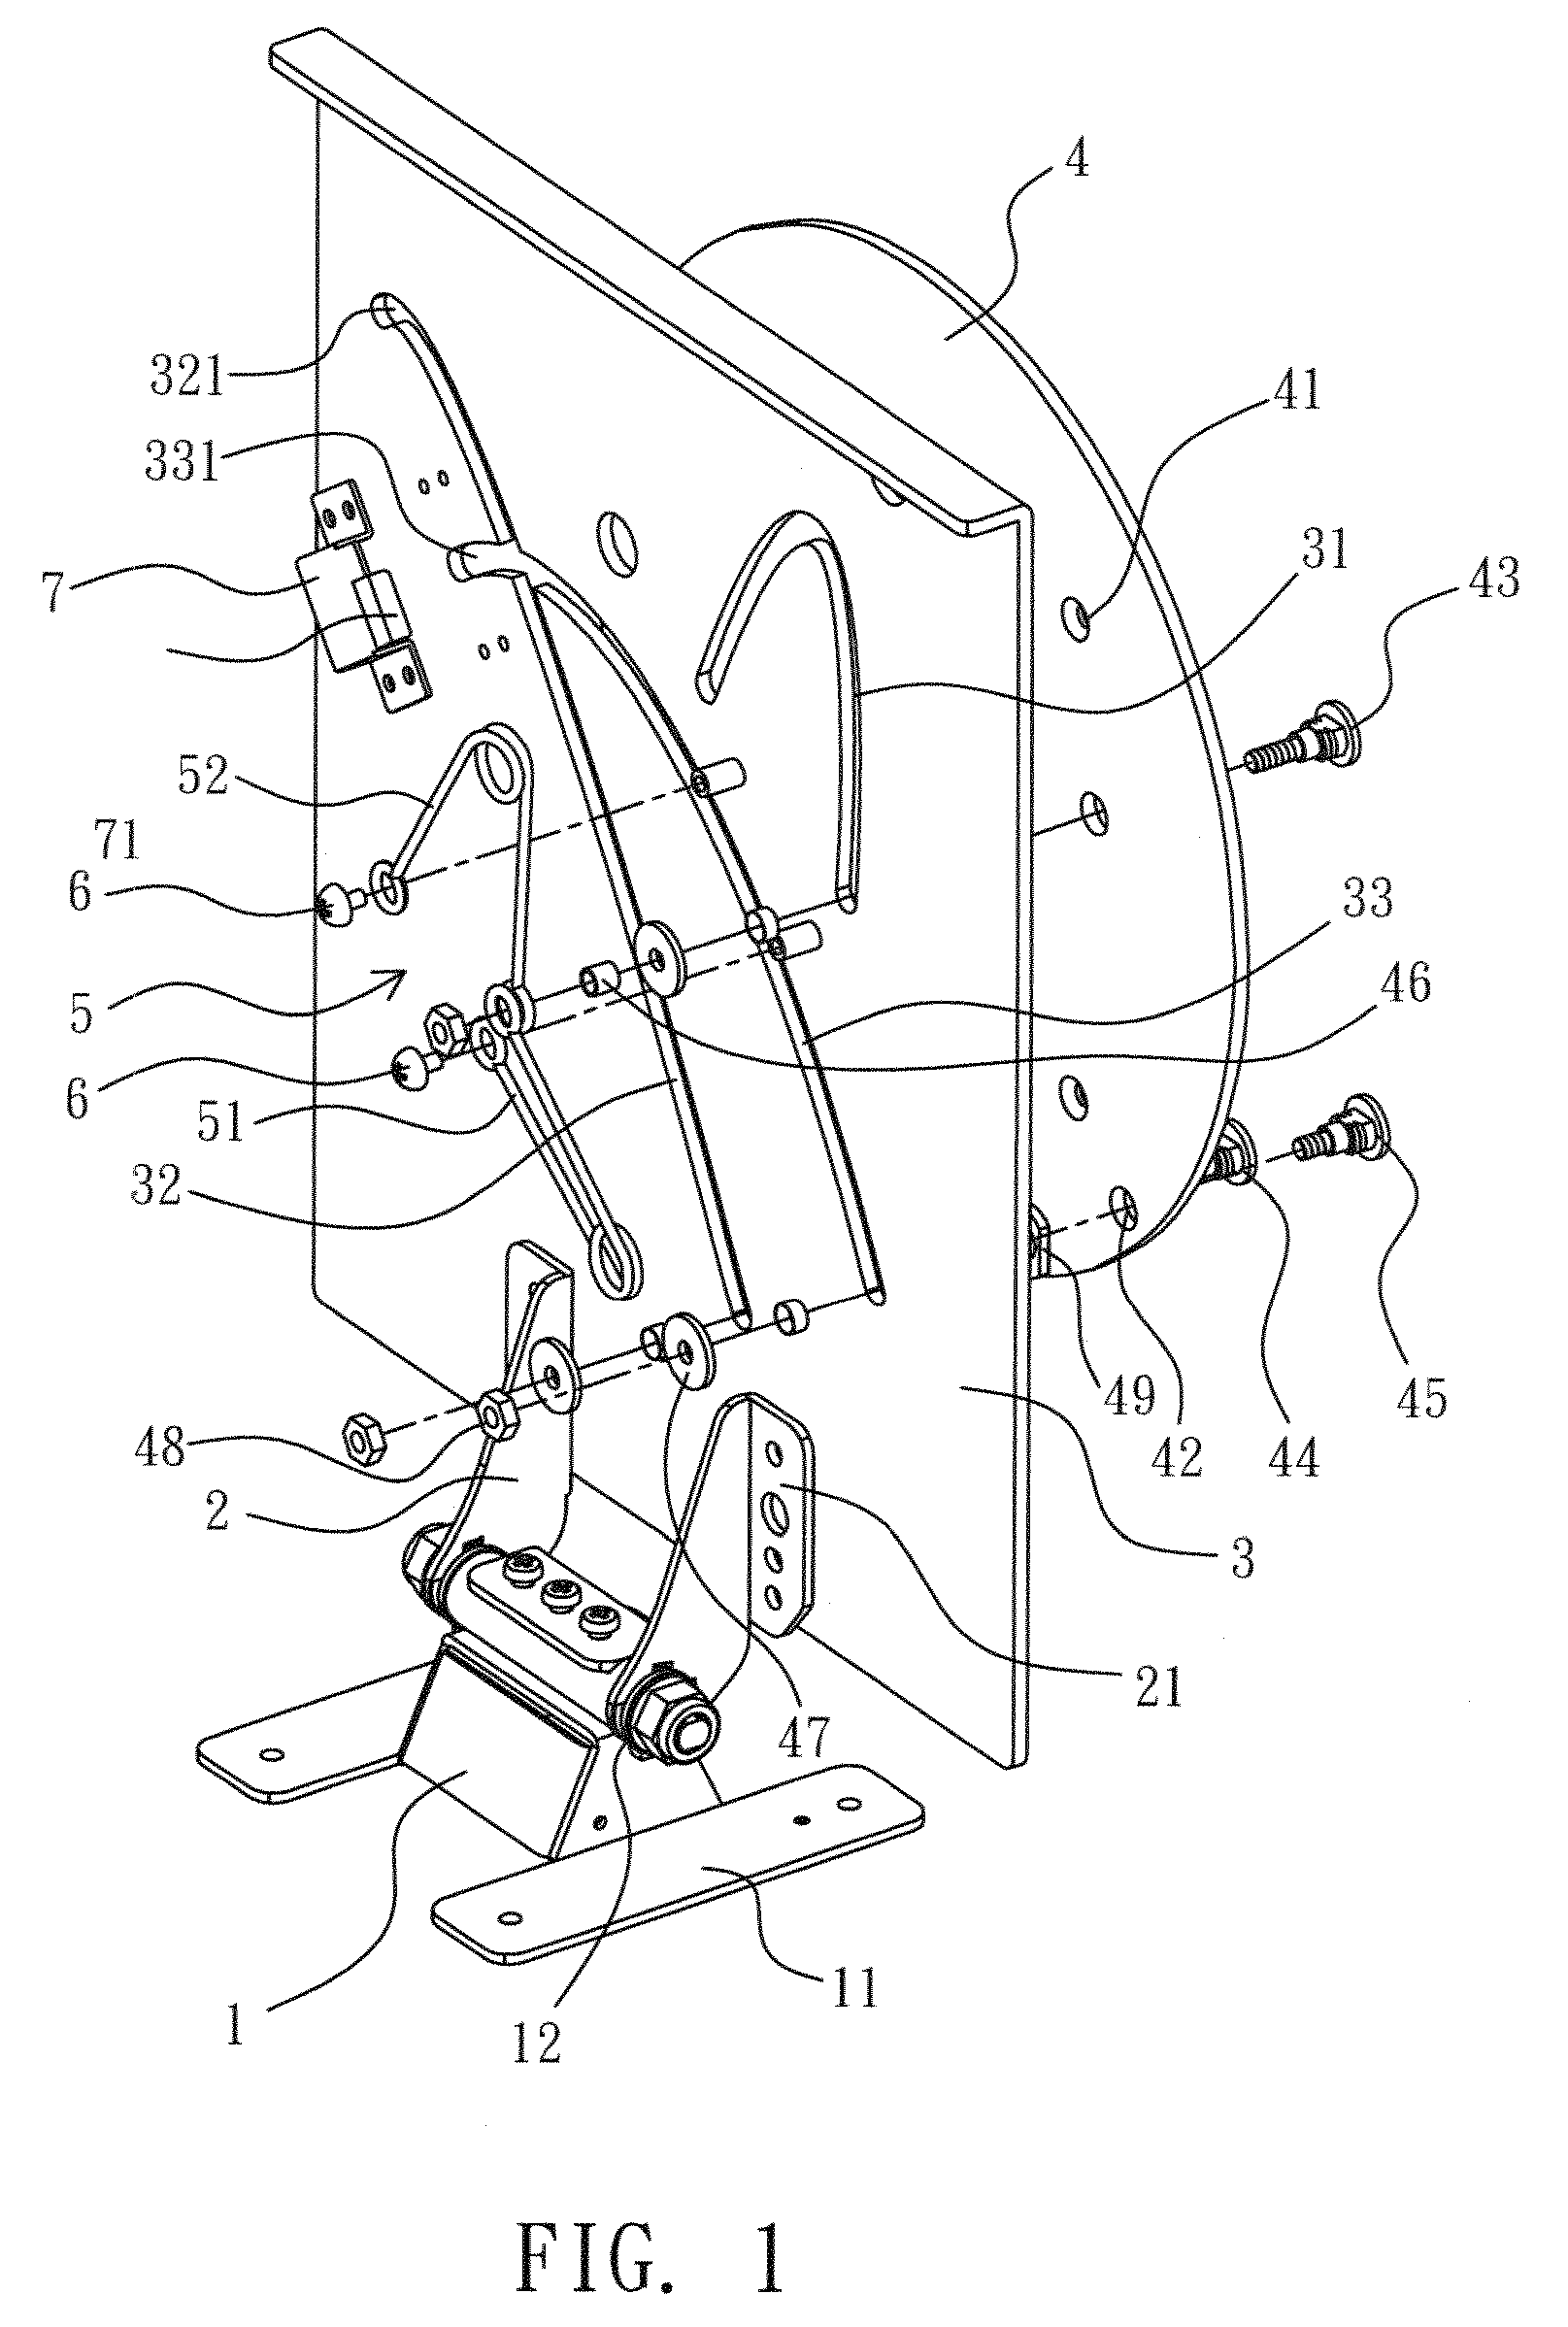 Planar rotation mechanism of supporting device